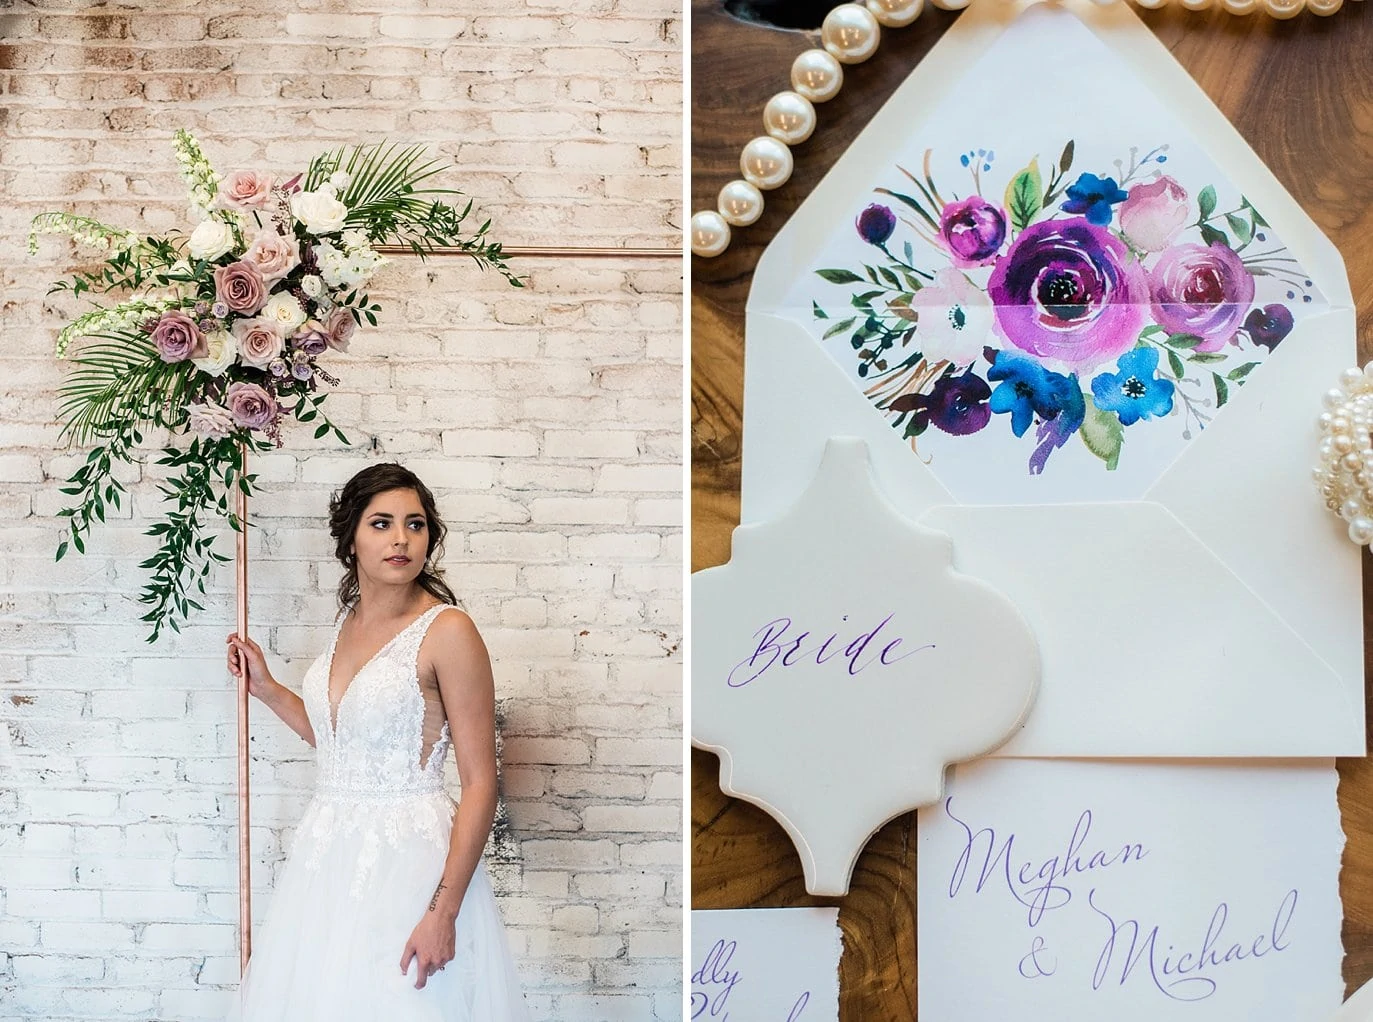 bride by copper pipe ceremony arch and watercolor invitation suite at Shyft Denver wedding by Lyons wedding photographer Jennie Crate